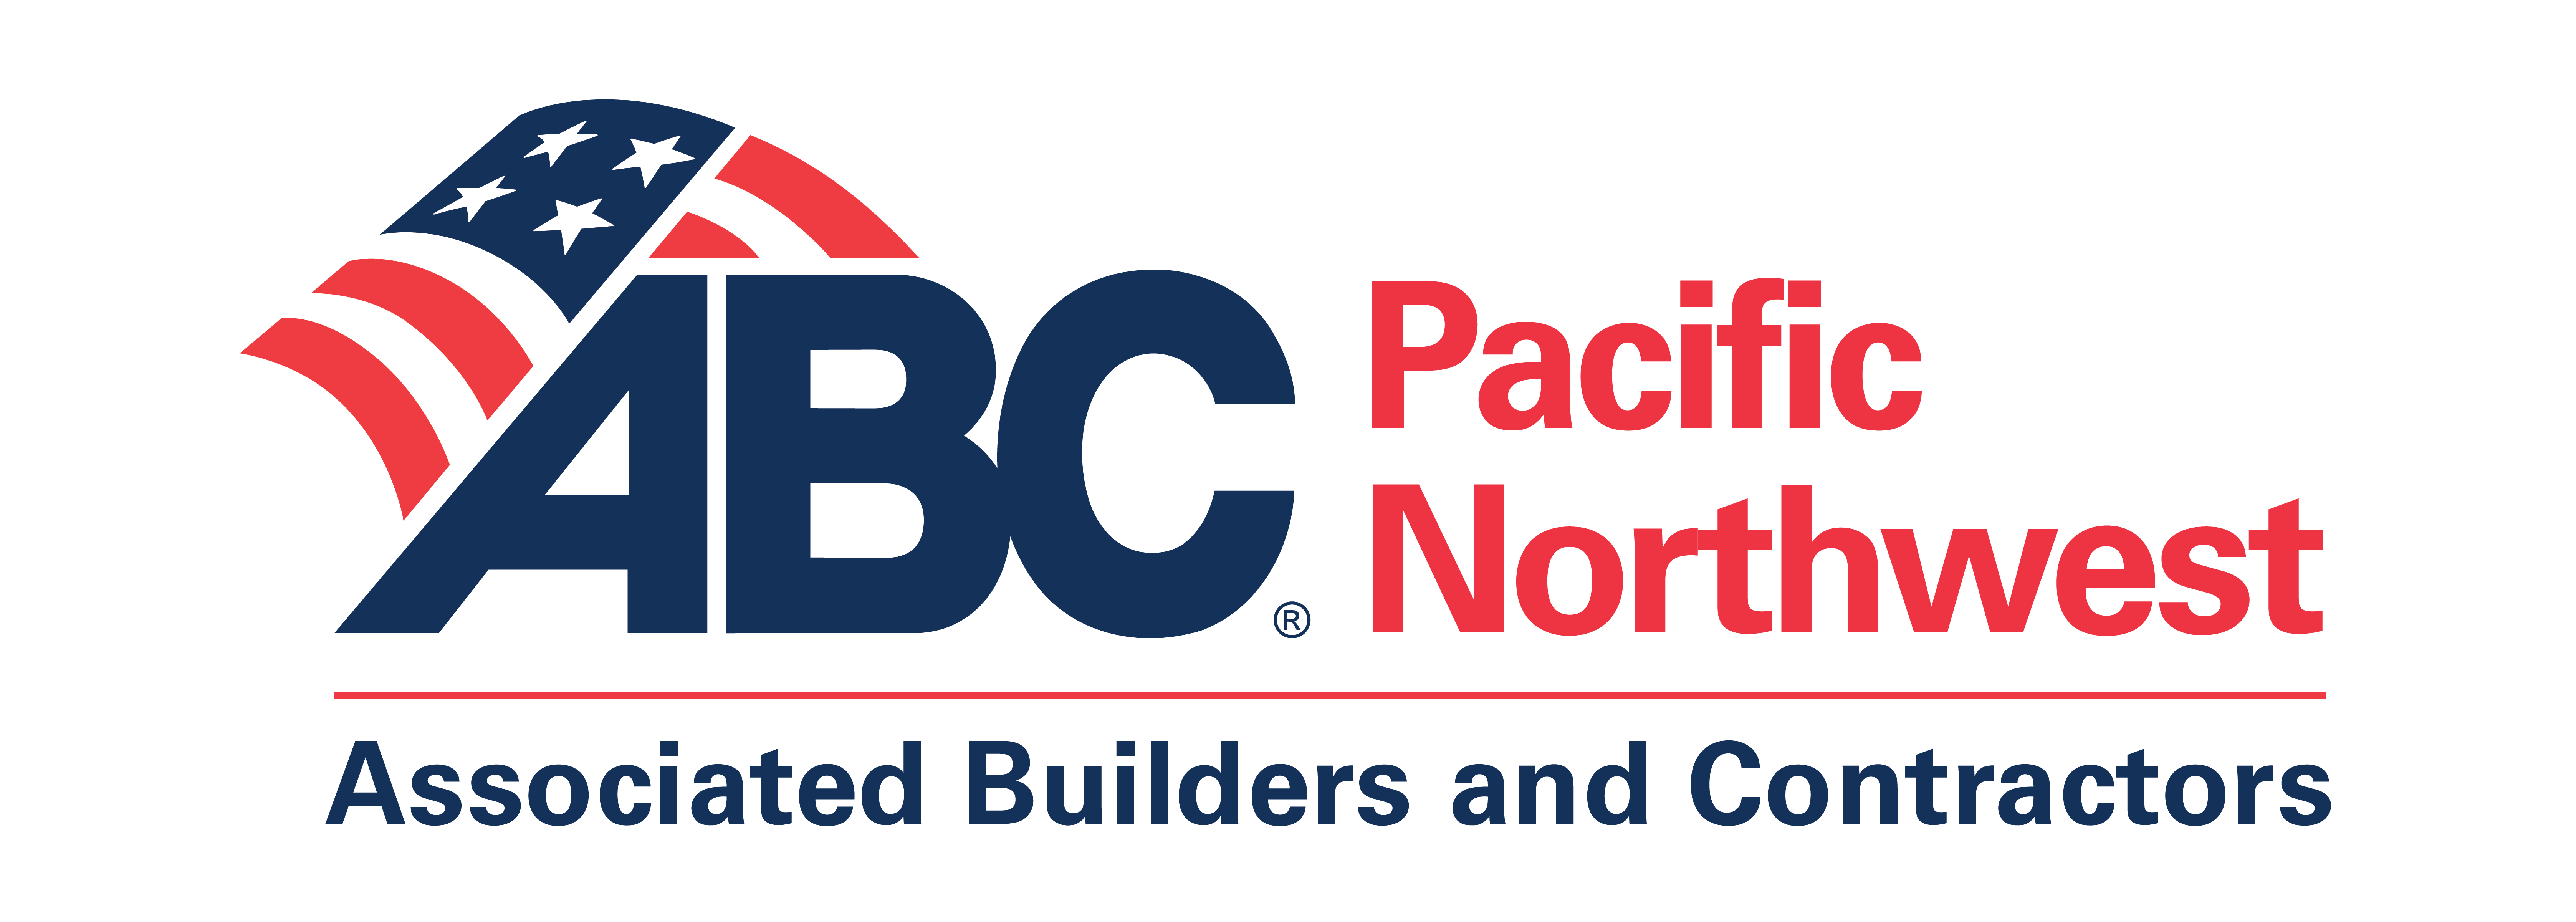 associated-builders-and-contractors-pacific-northwest-chapter